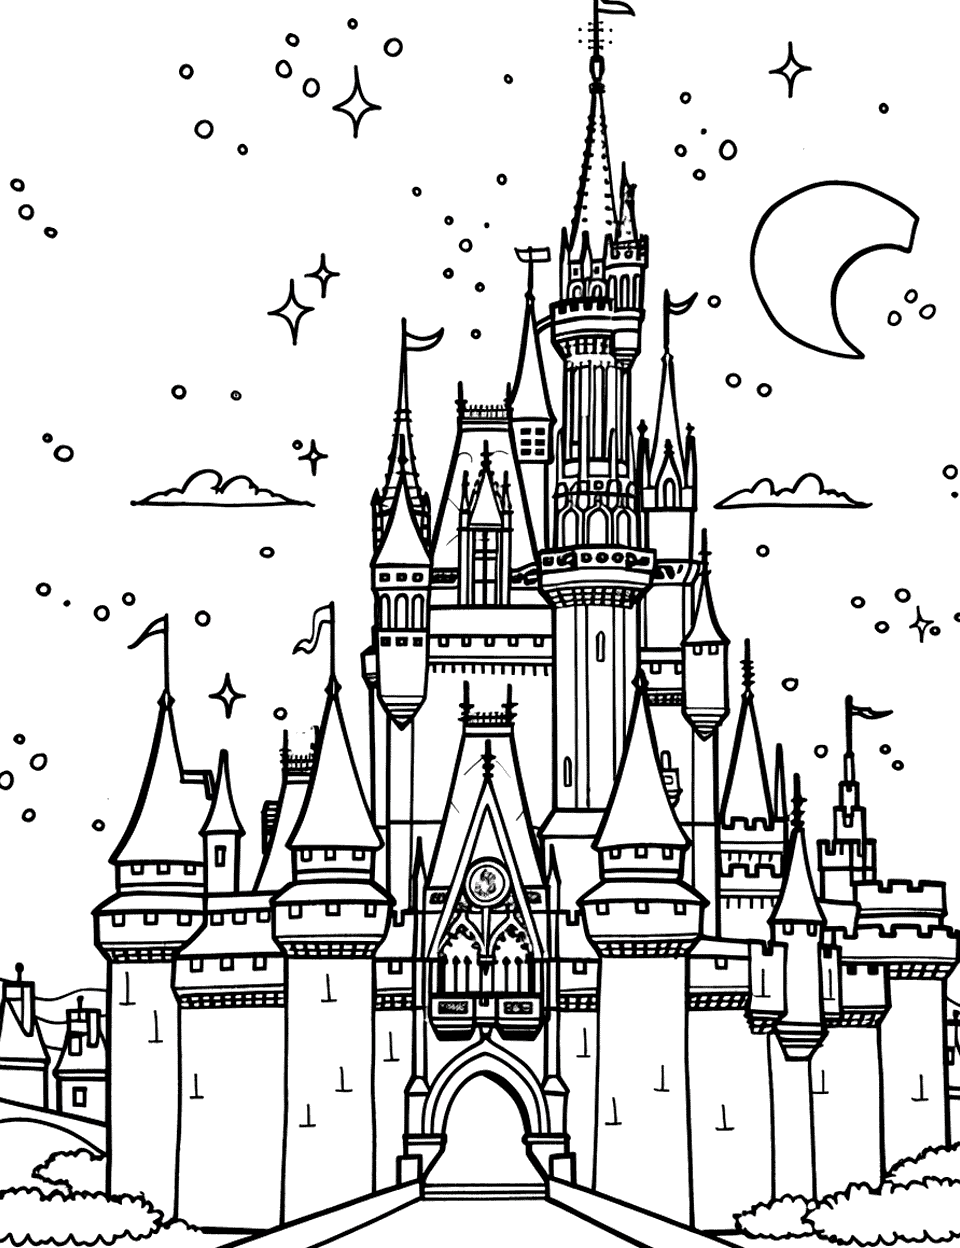 Cinderella's Castle at Night Coloring Page - The iconic Disney Cinderella castle under a starry sky.